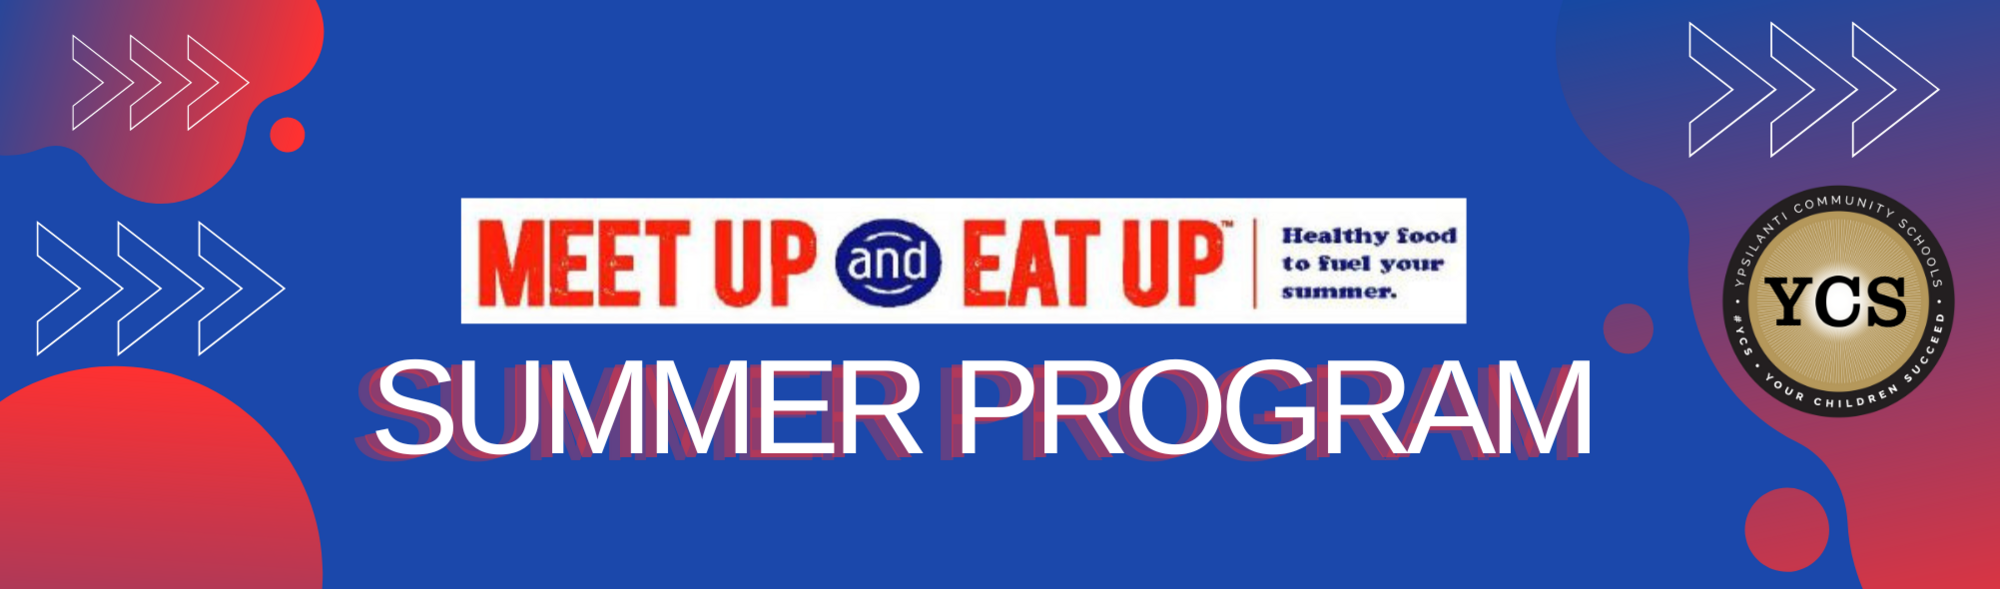 Meet Up and Eat Up Summer Program Health food to fuel your summer and YCS logo